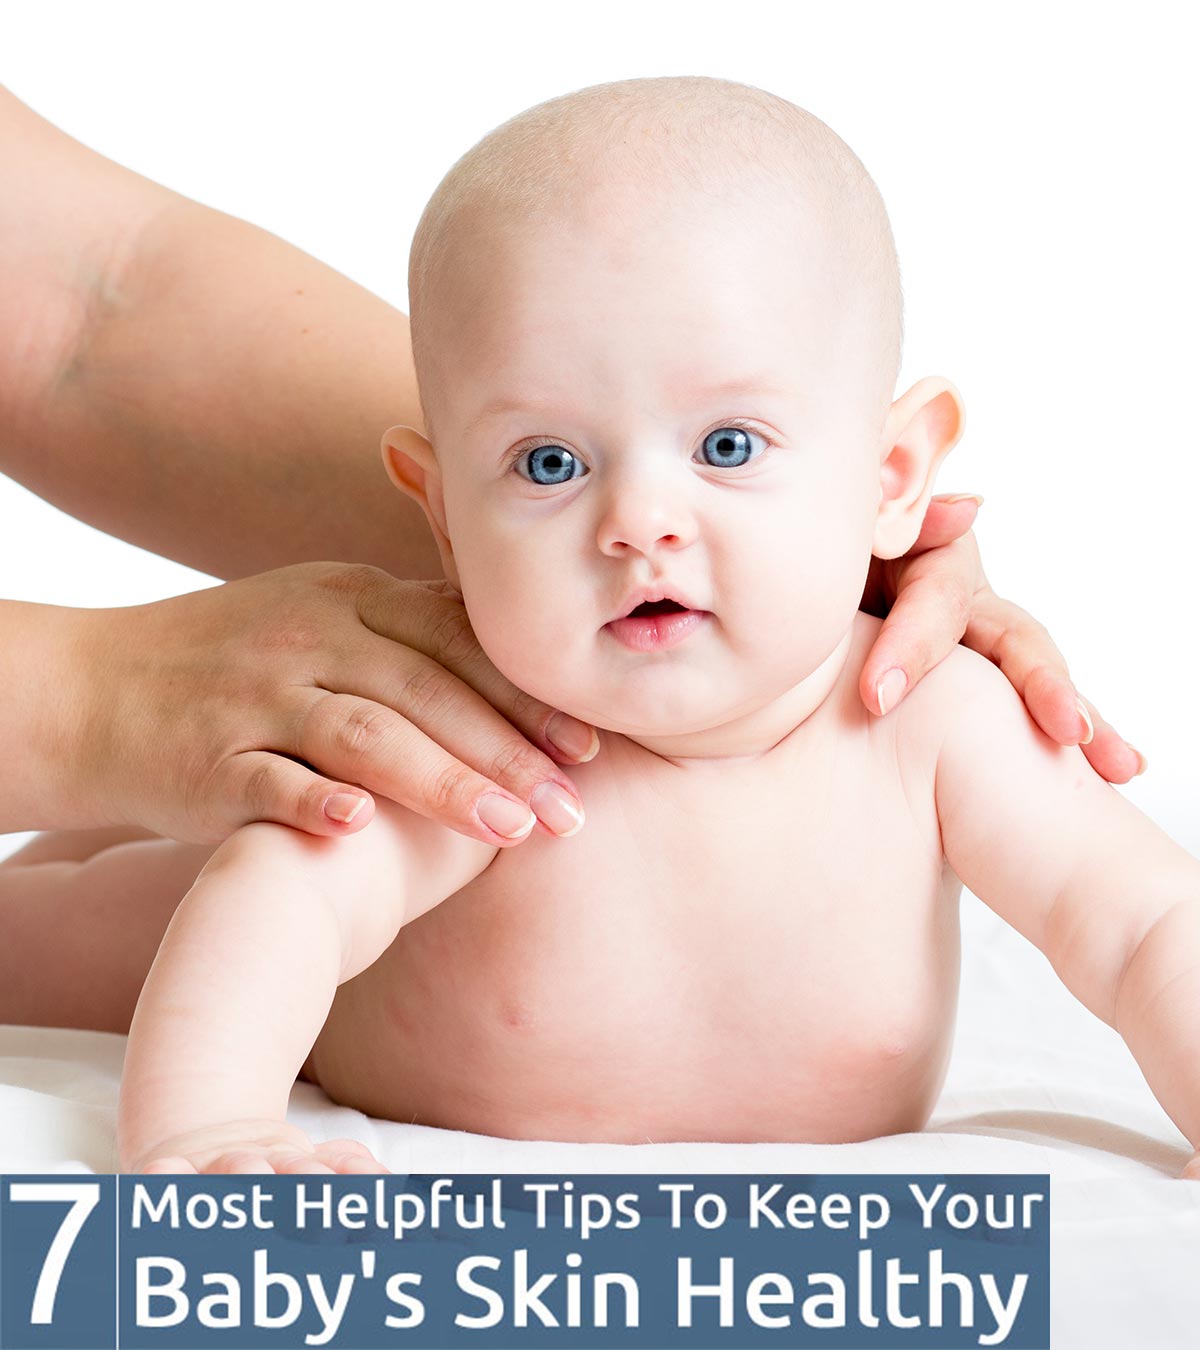 7 Effective And Useful Tips To Keep Your Baby's Skin Healthy